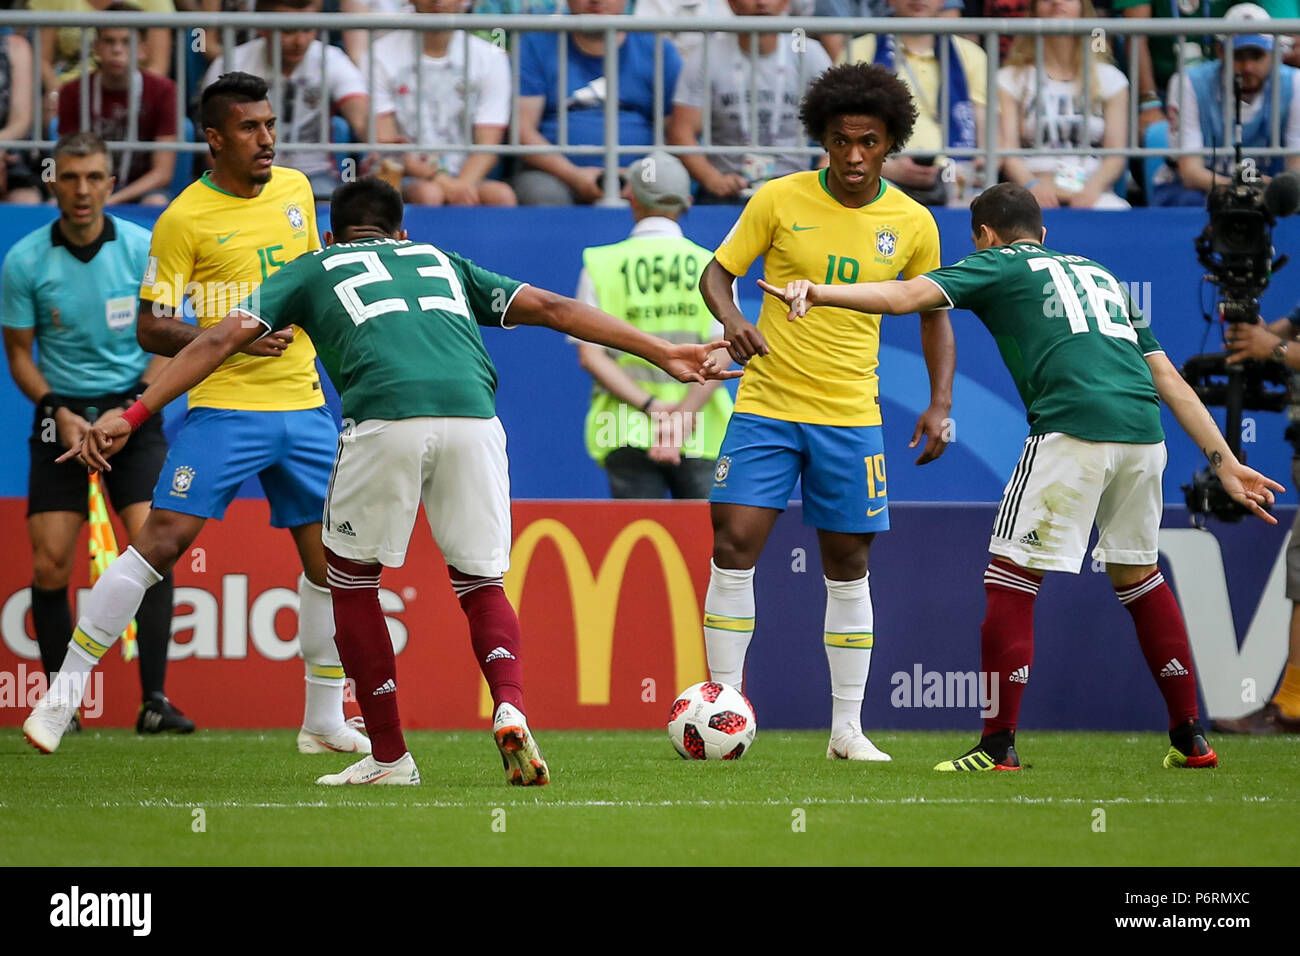 Samara, Russia. 02nd July, 2018. Mehdi Carcela and Amine Harit from Morocco, Paulo Henrique Sampaio Filho and Willian Borges da Silva from Brazil during a match between Brazil and Mexico valid for the eighth round of World Cup 2018 finals, held at Arena Samara, Russia Credit: Thiago Bernardes/Pacific Press/Alamy Live News Stock Photo